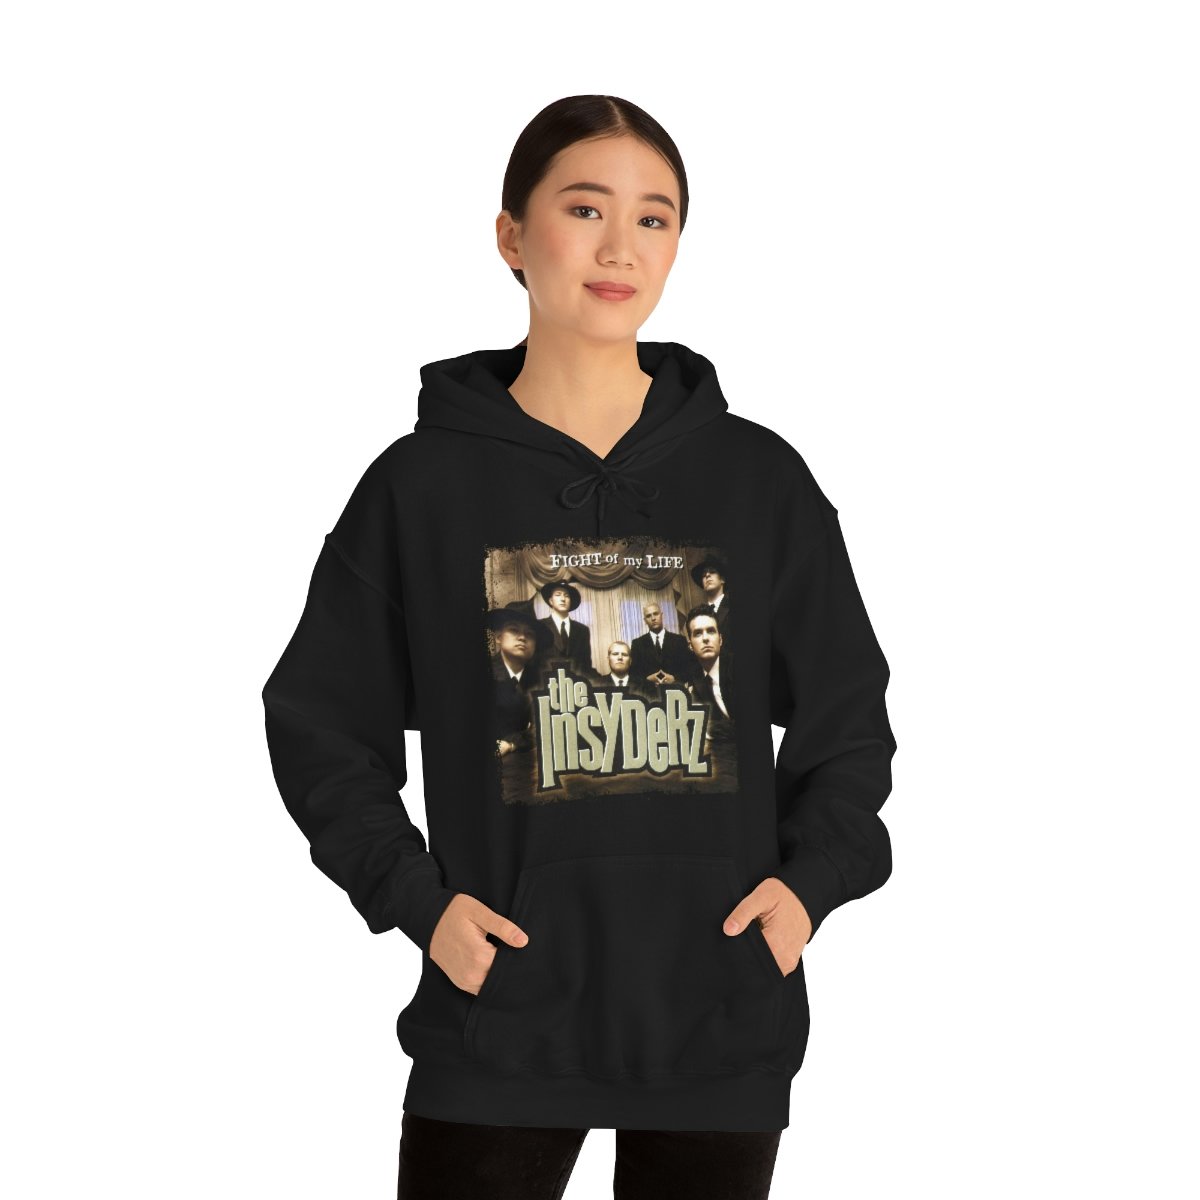 The Insyderz – Fight of My Life Pullover Hooded Sweatshirt